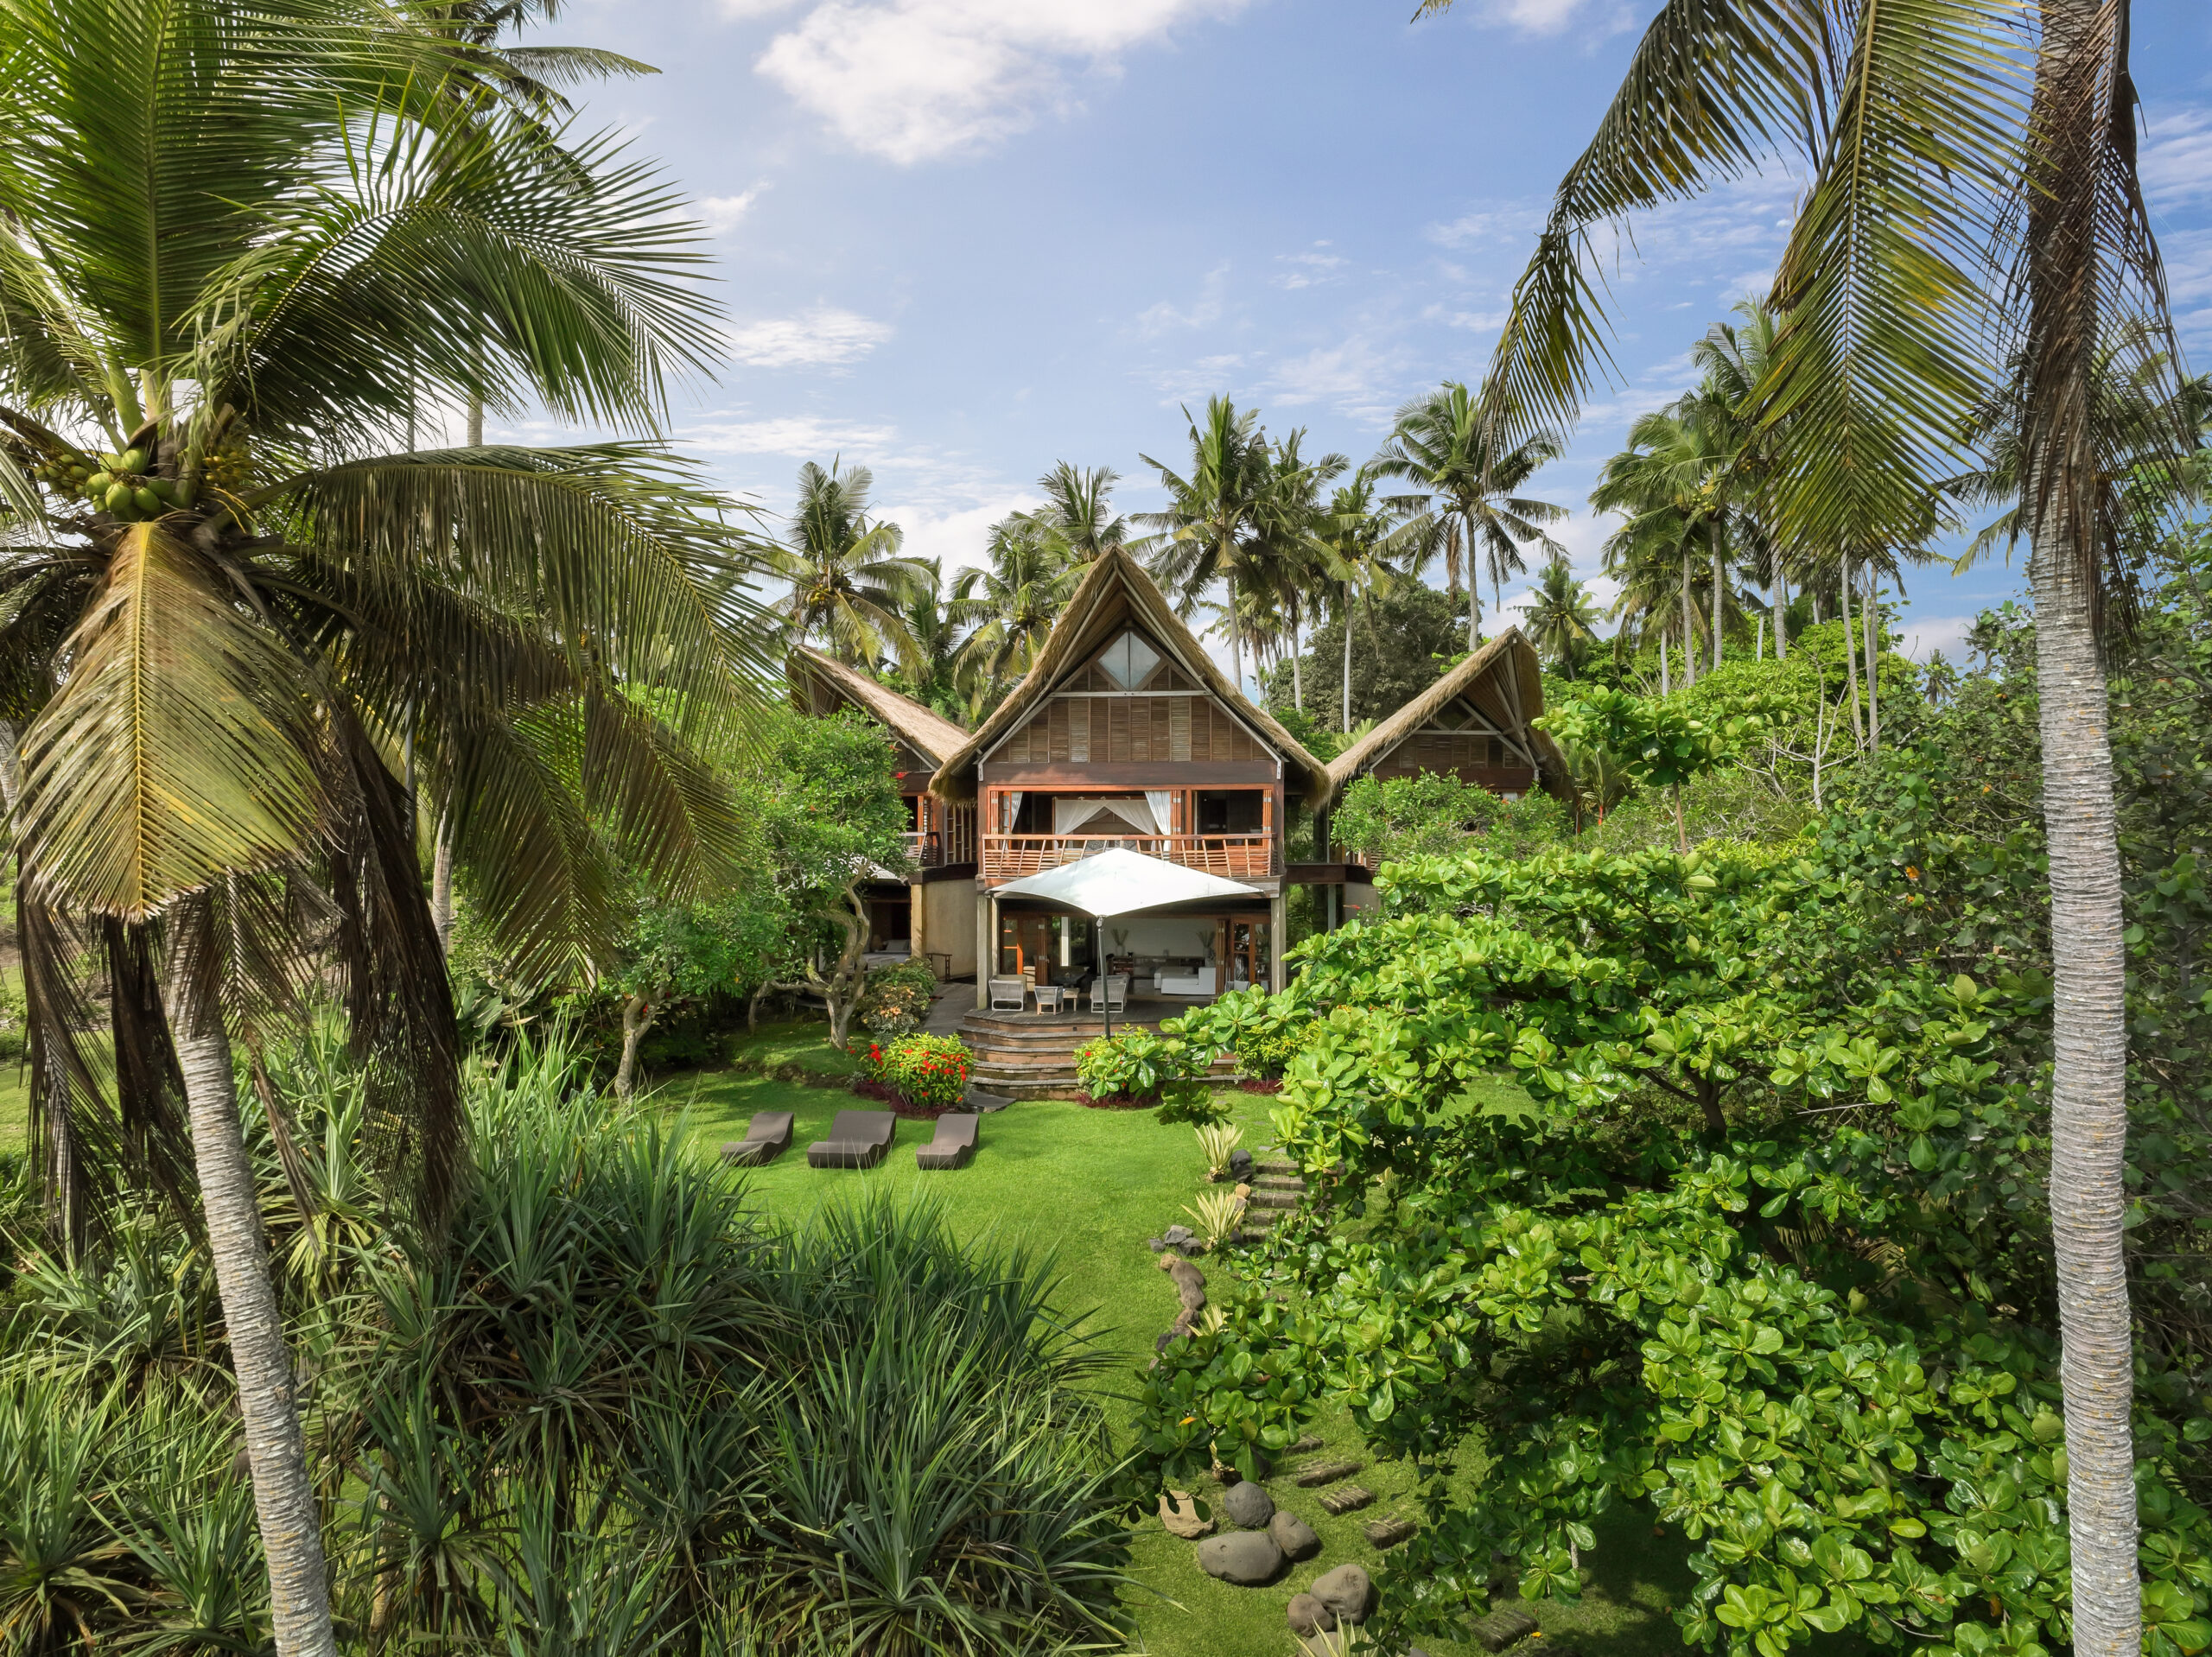 picture of The Cove Bali, a boutique resort in Indonesia